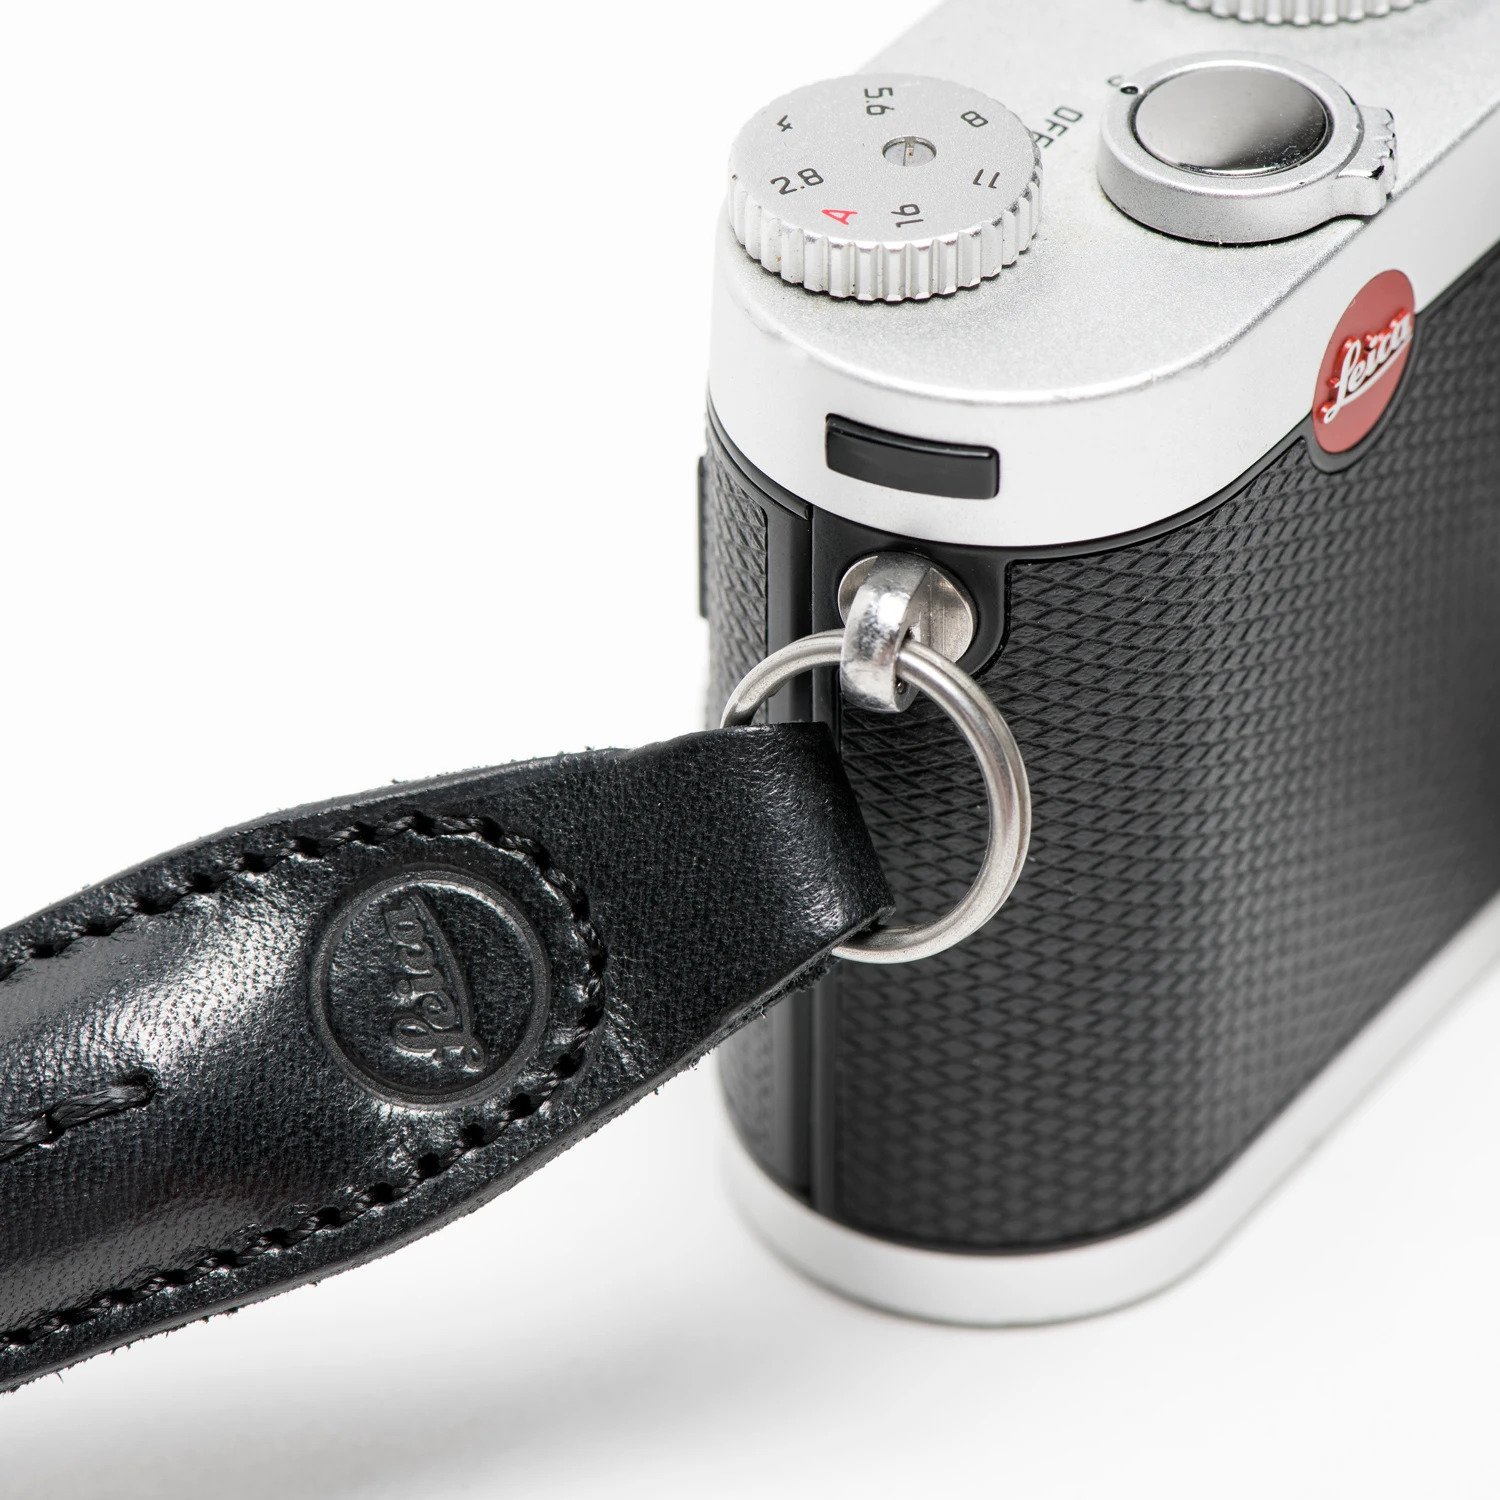 Leica COOPH Rope Strap - Red